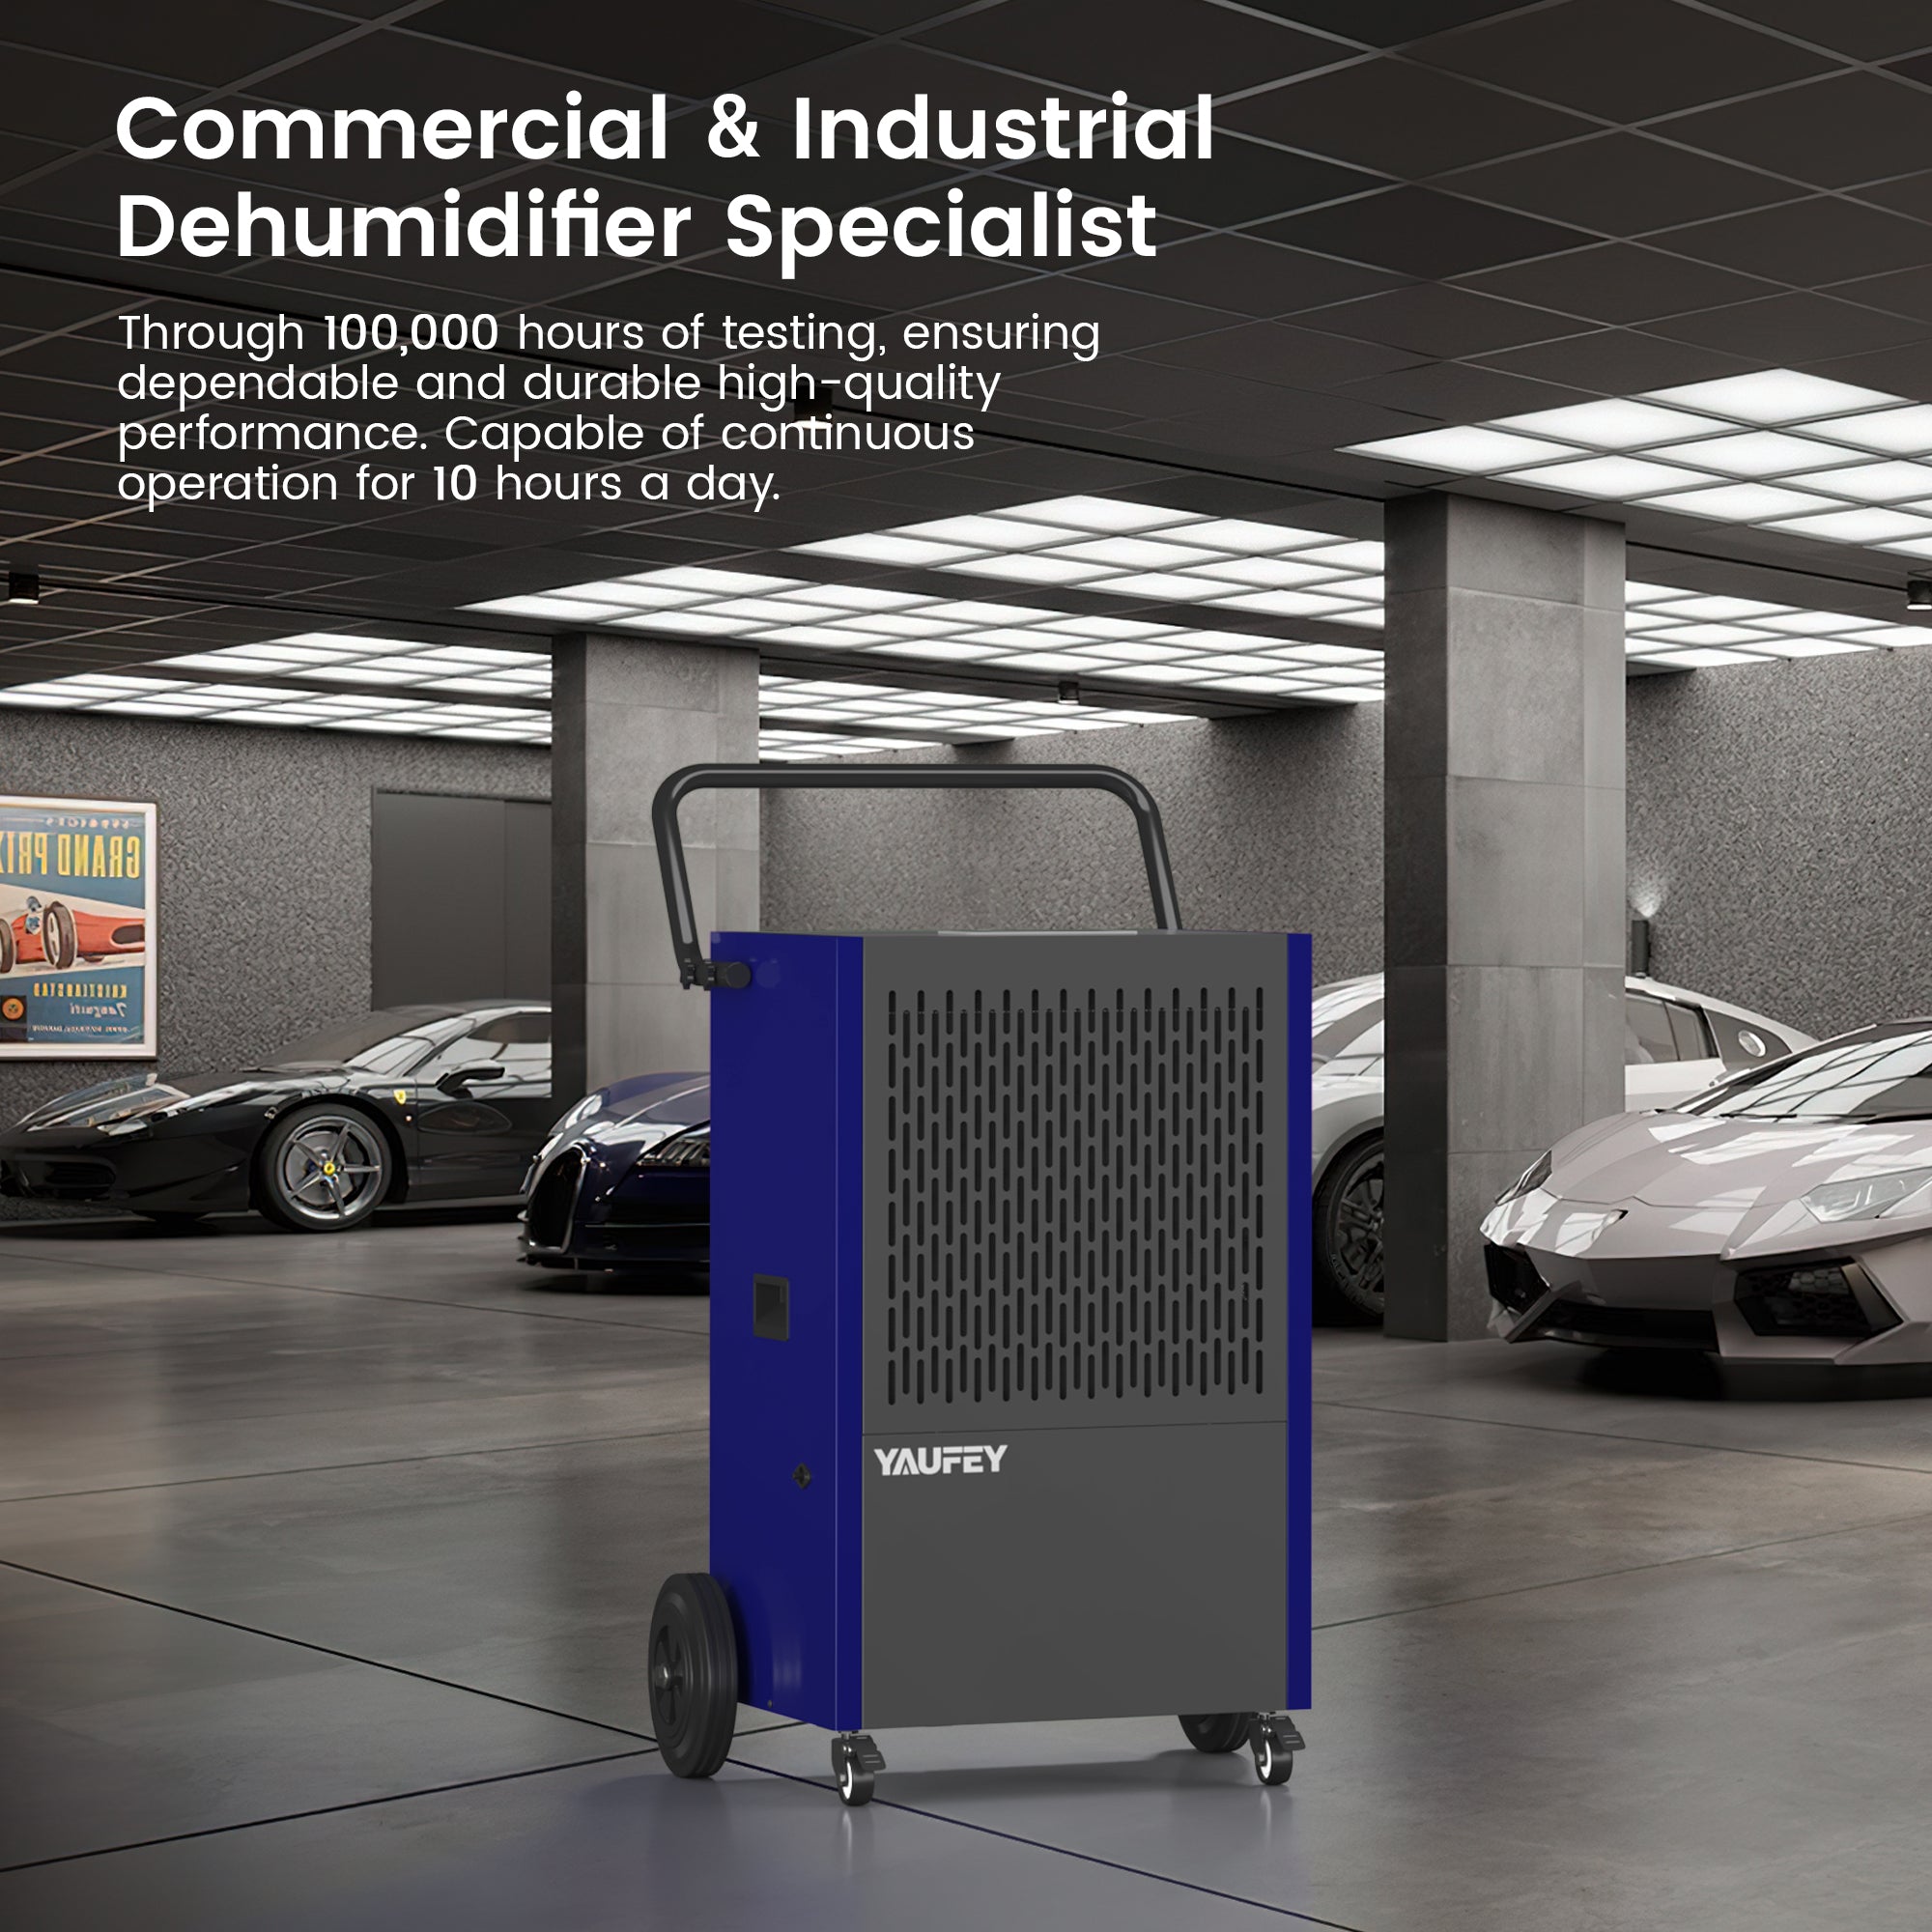 Yaufey Commercial Dehumidifier with Pump and Drain Hose, 216 Pints Dehumidifier for Basement, Intelligent Humidity Control, Large Capacity Industrial Dehumidifier for Large Room up to 8500 Sq. Ft (Model: DP905C)